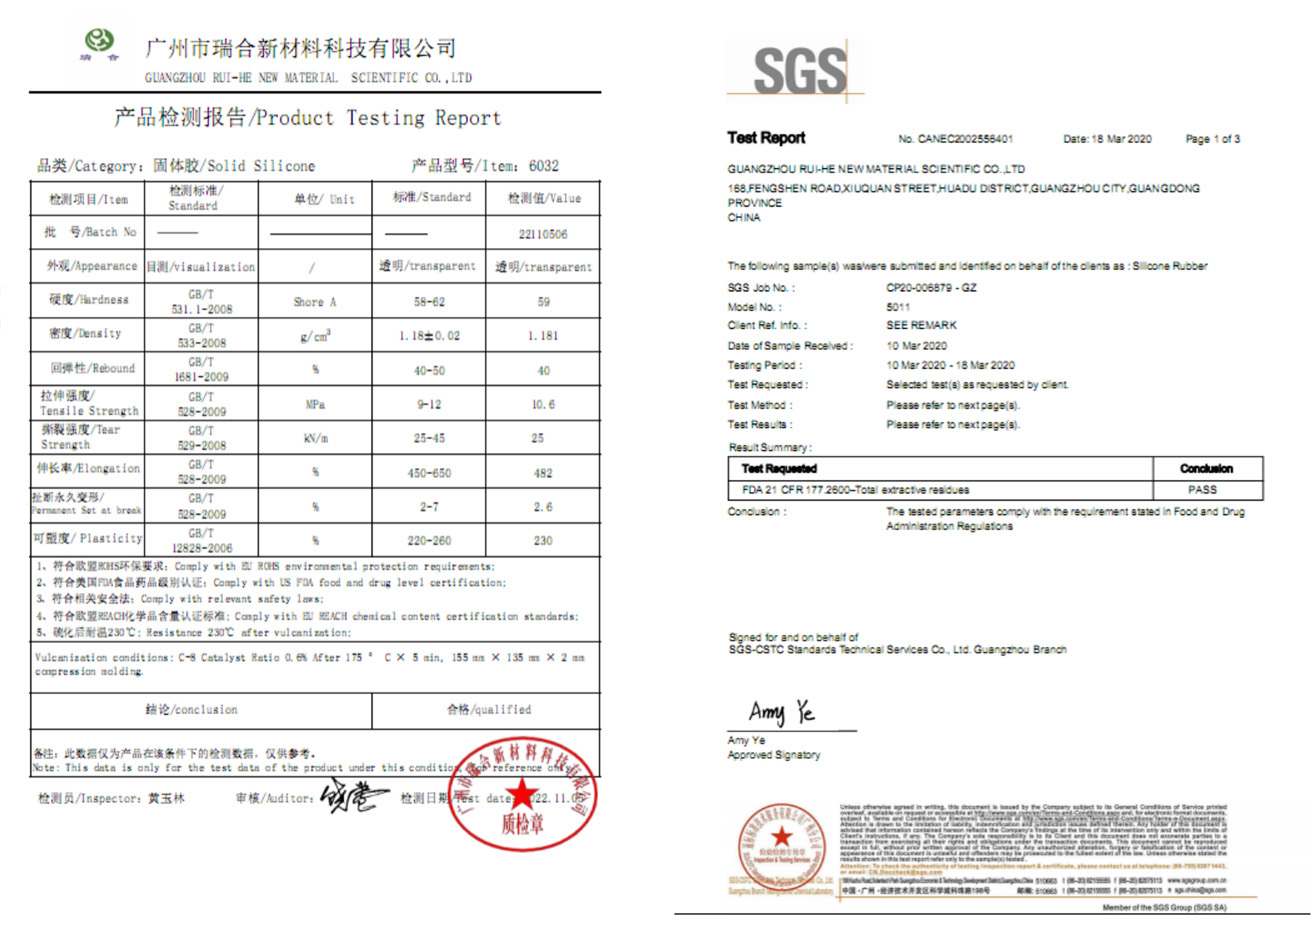 Food grade silicone - data sheet and report